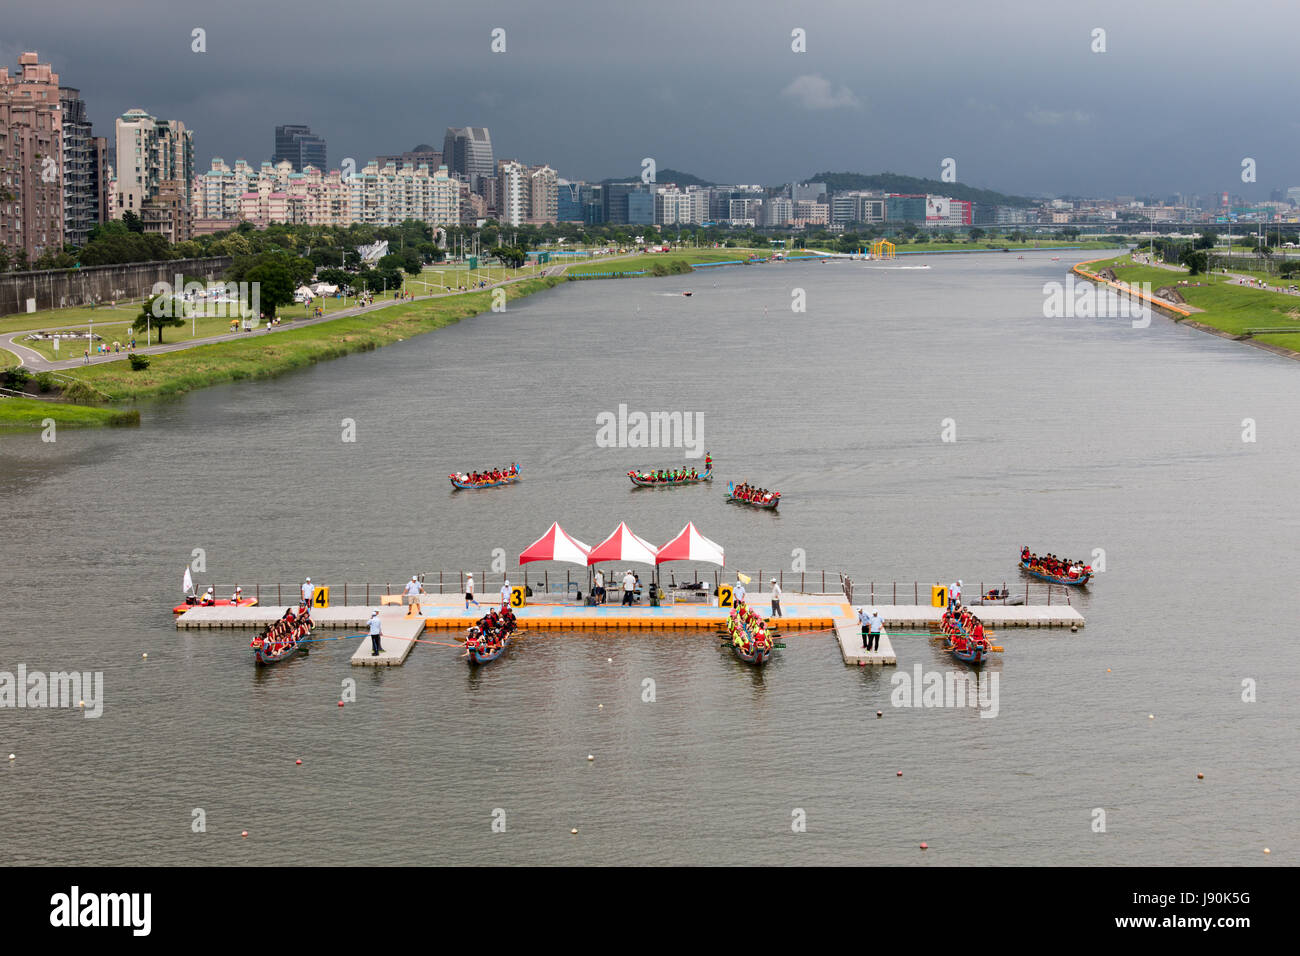 Taipei, Taiwan. 30th May, 2017. Four dragon boats wait for the start signal at the dragon boat races that take place on Keelung River in Taipei every year on Duanwu Festival, better known as Dragon Boat Festival. Credit: Perry Svensson/Alamy Live News Stock Photo